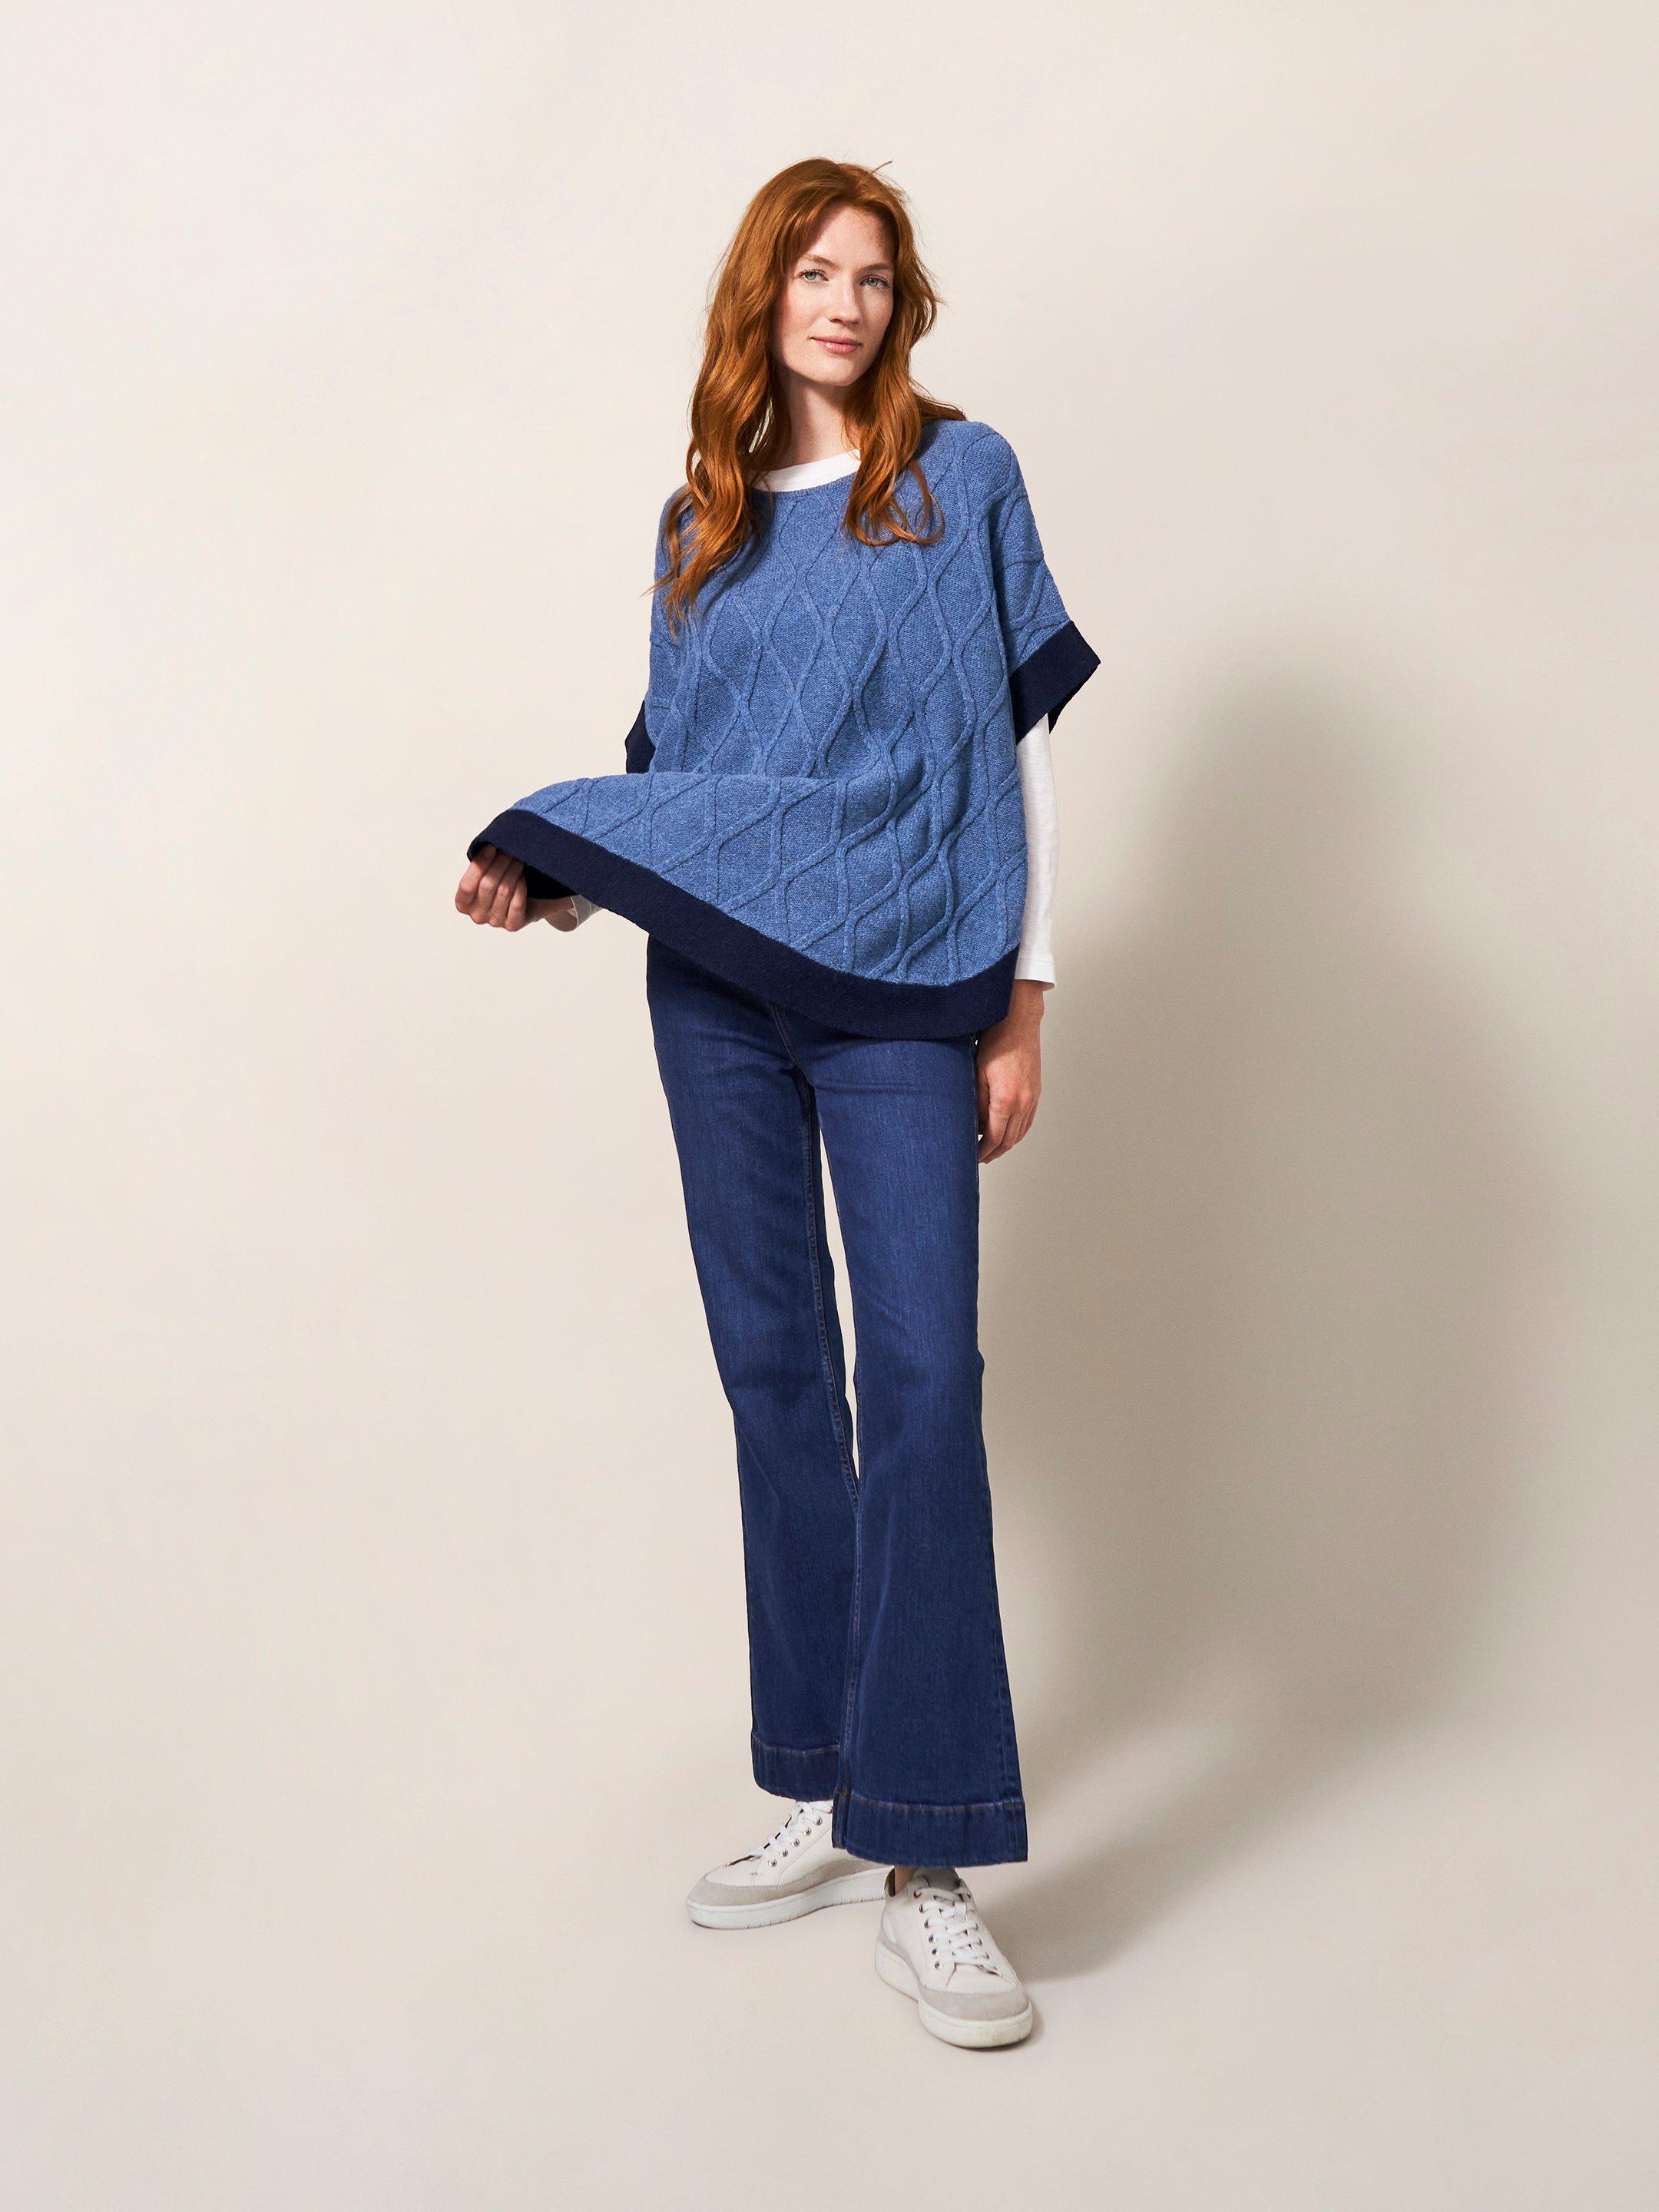 Fern Knitted Casual Poncho